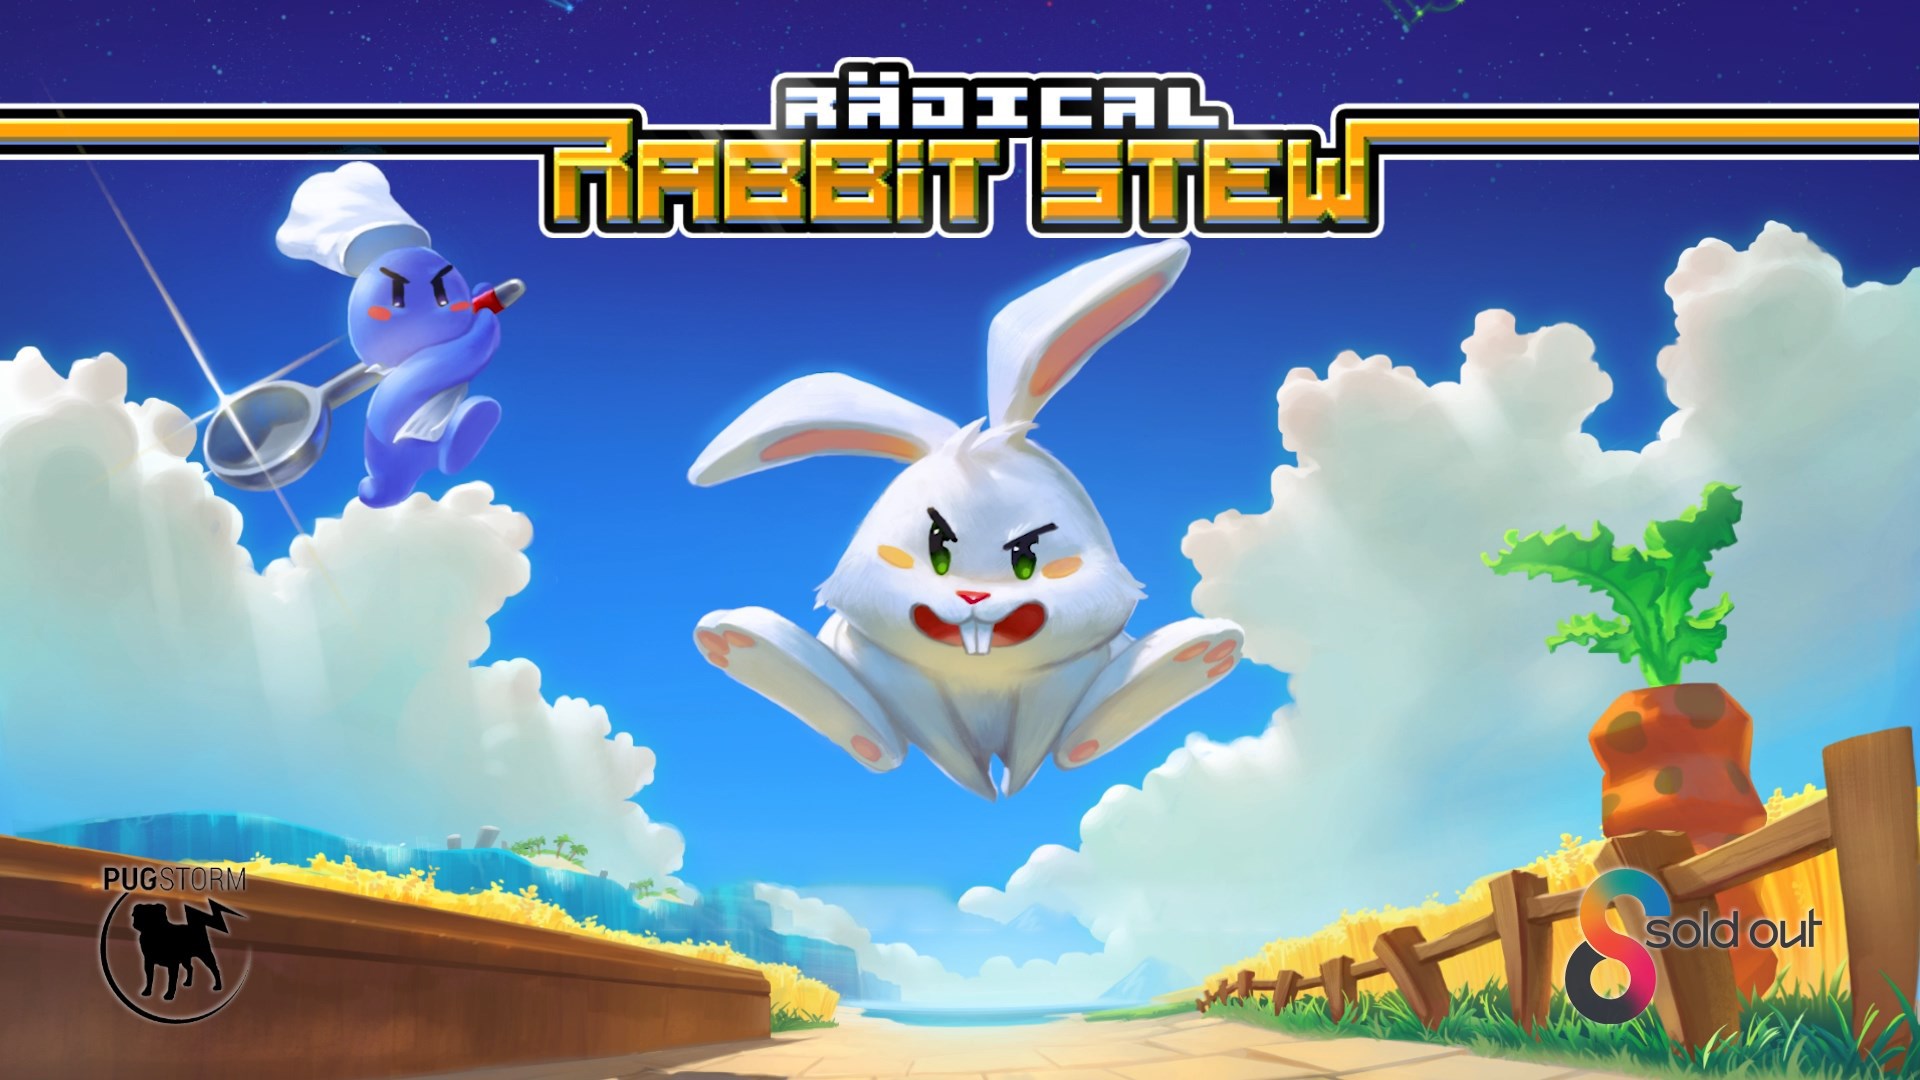 Video For Radical Rabbit Stew Is Now Available For Digital Pre-order And Pre-download On Xbox One